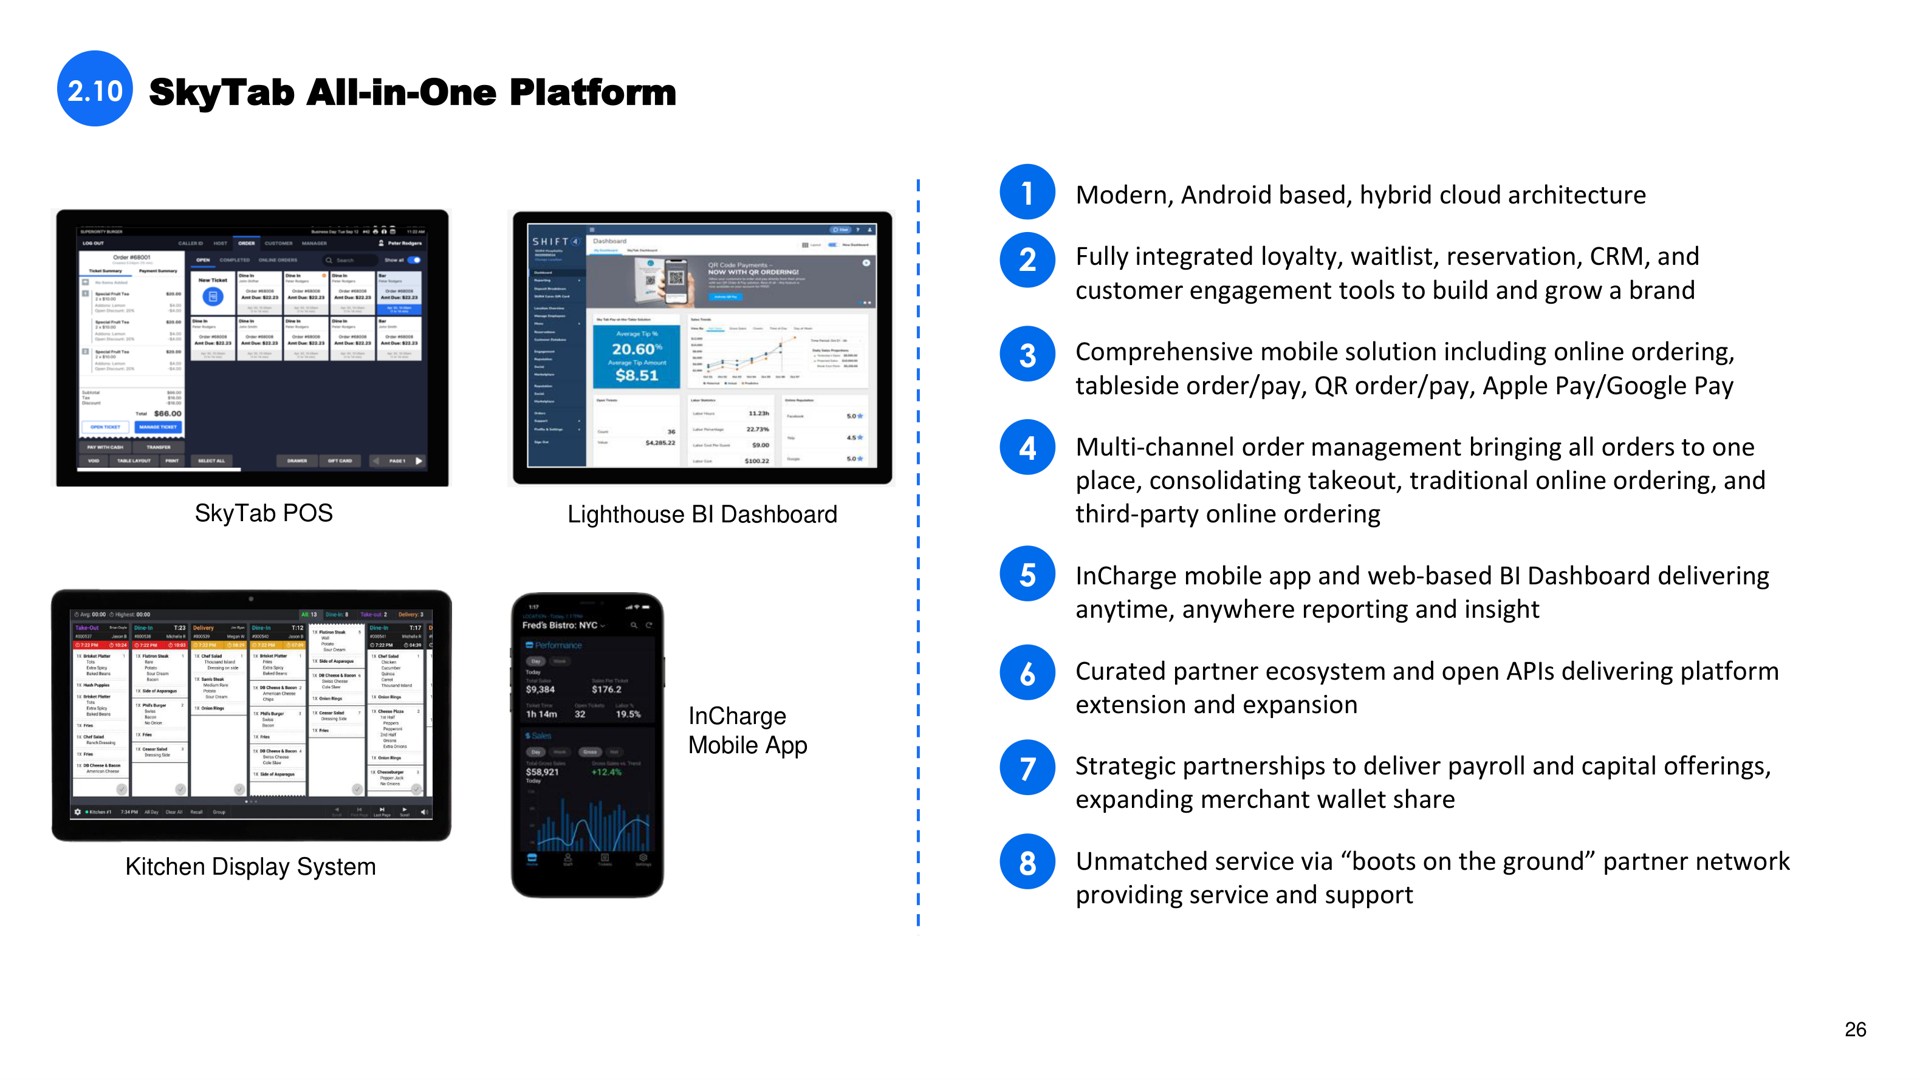 all in one platform modern android based hybrid cloud architecture fully integrated loyalty reservation and customer engagement tools to build and grow a brand comprehensive mobile solution including ordering order pay order pay apple pay pay channel order management bringing all orders to one place consolidating traditional ordering and third party ordering mobile and web based dashboard delivering anywhere reporting and insight partner ecosystem and open delivering platform extension and expansion strategic partnerships to deliver payroll and capital offerings expanding merchant wallet share unmatched service via boots on the ground partner network providing service and support pos | Shift4